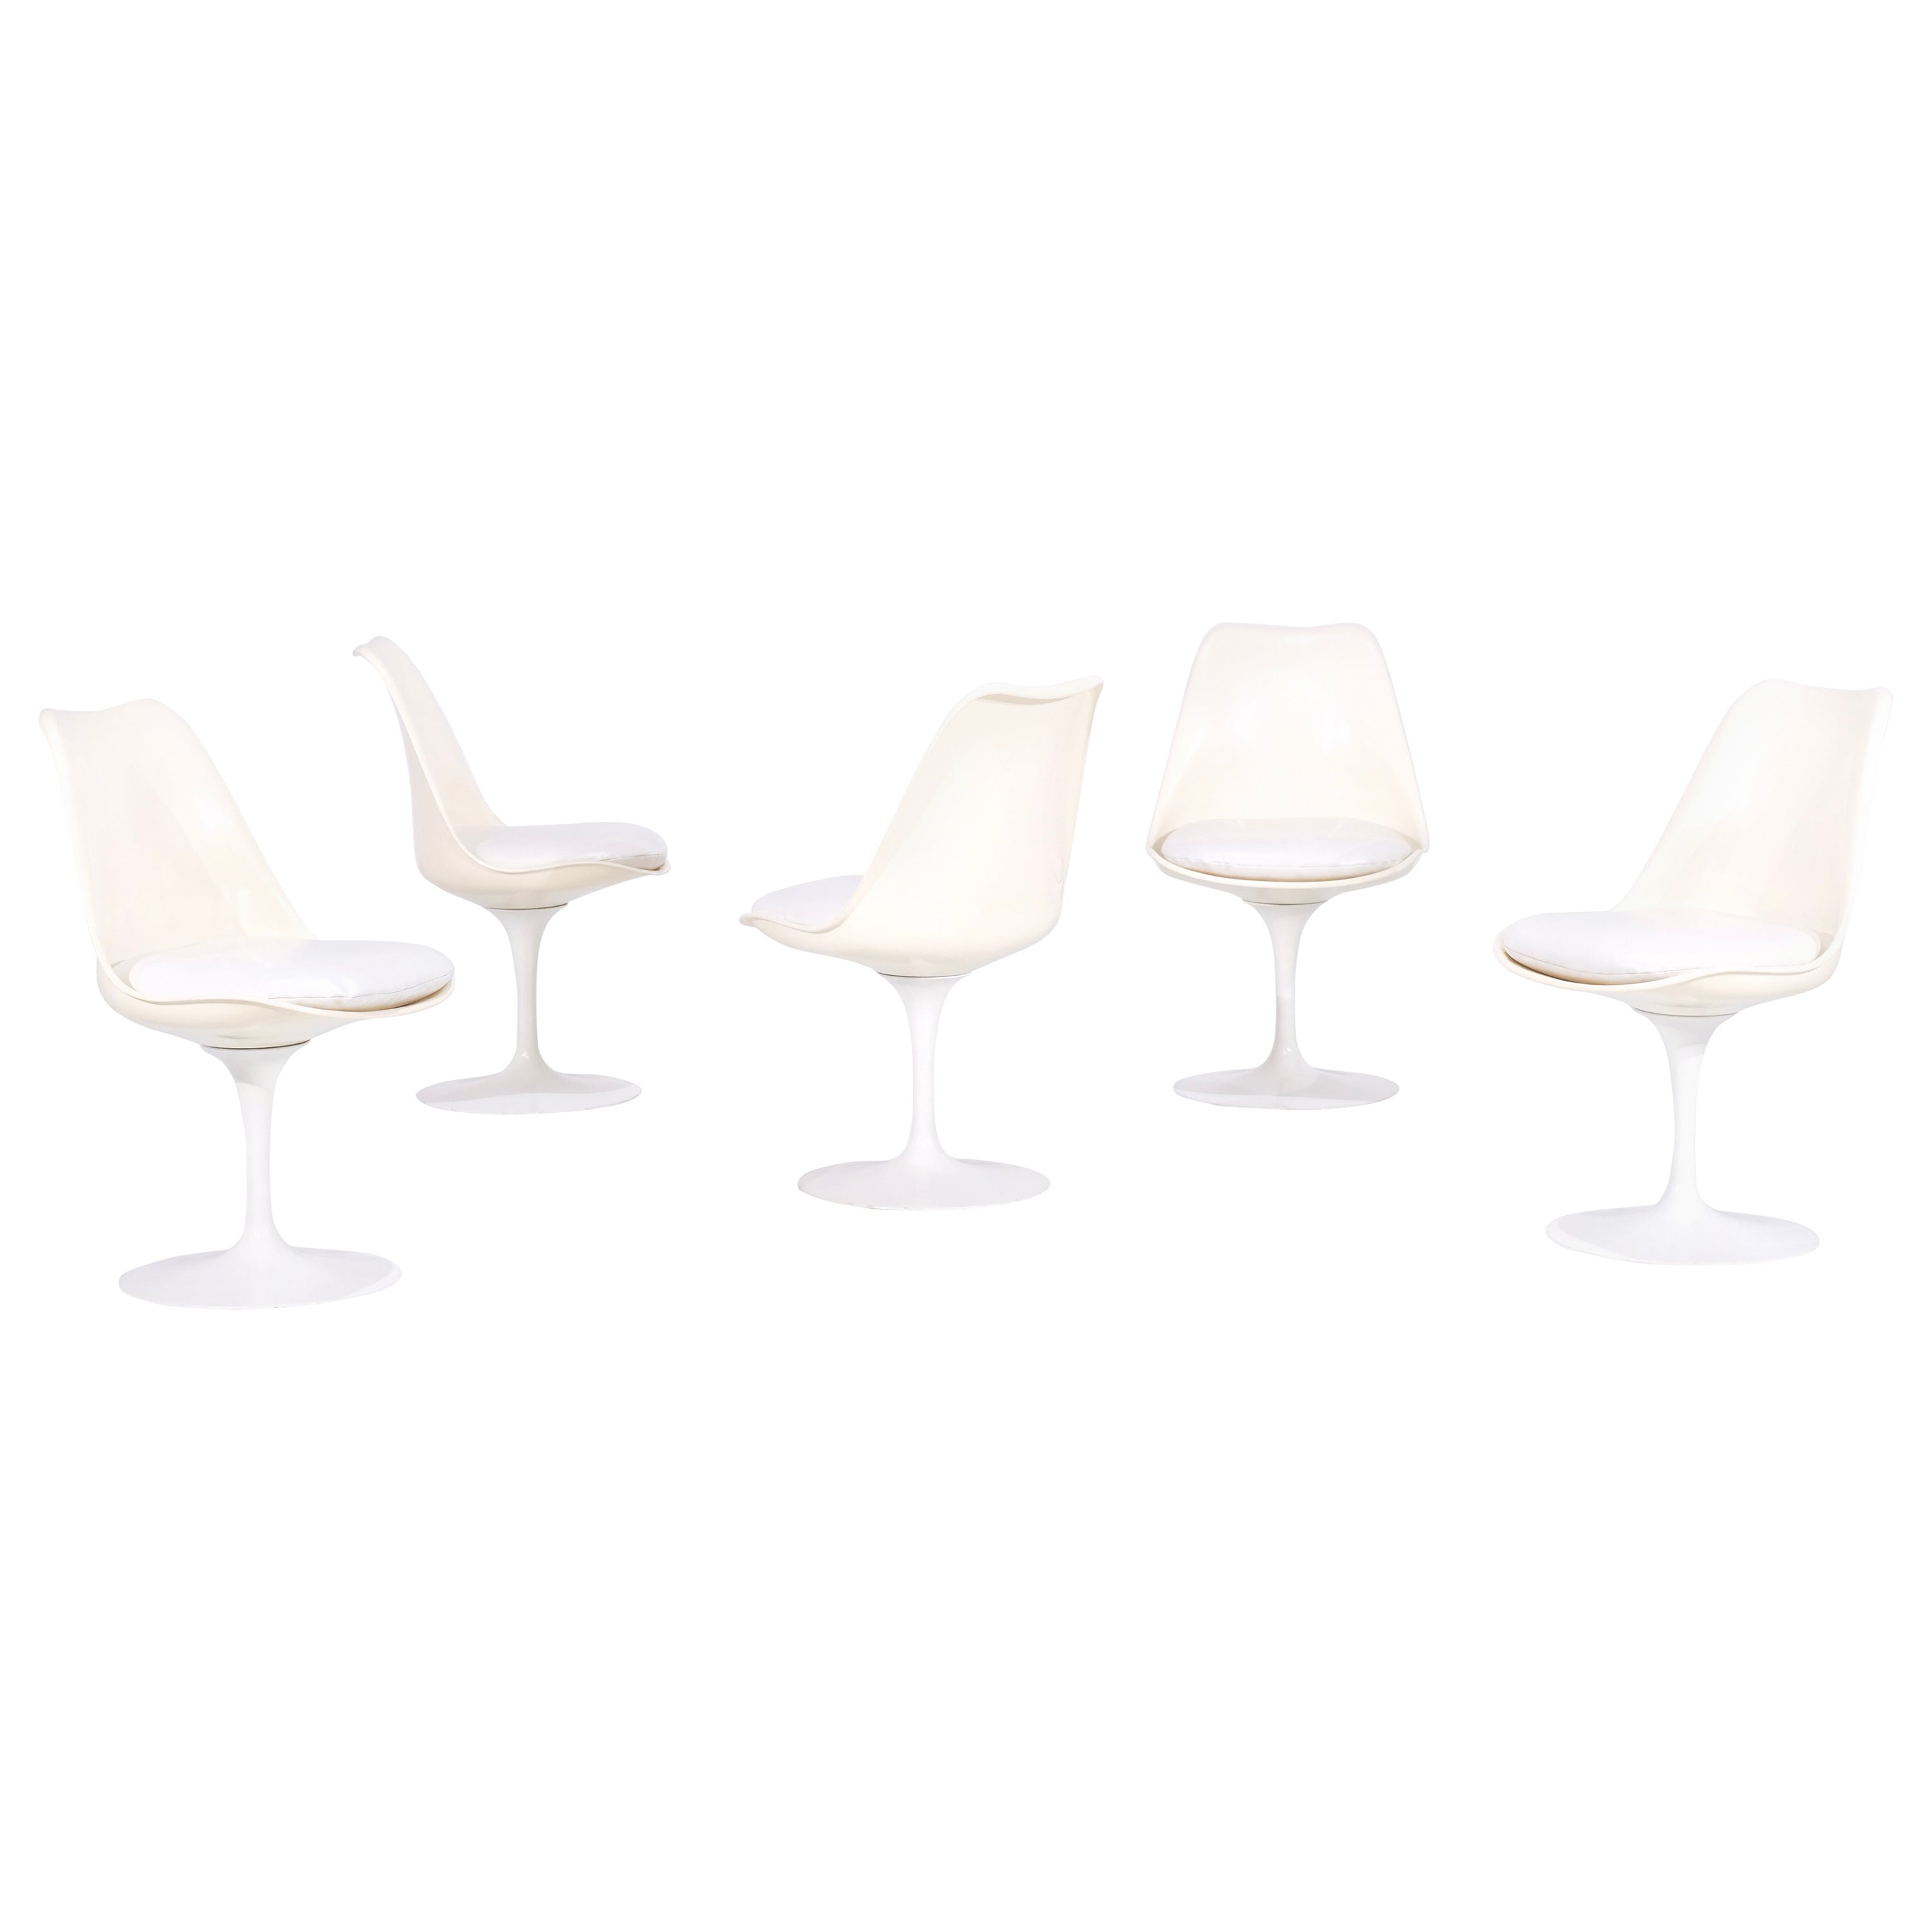 Set of Chair model "Tulip" by Eero Saarinen For Knoll International, USA 1957. For Sale